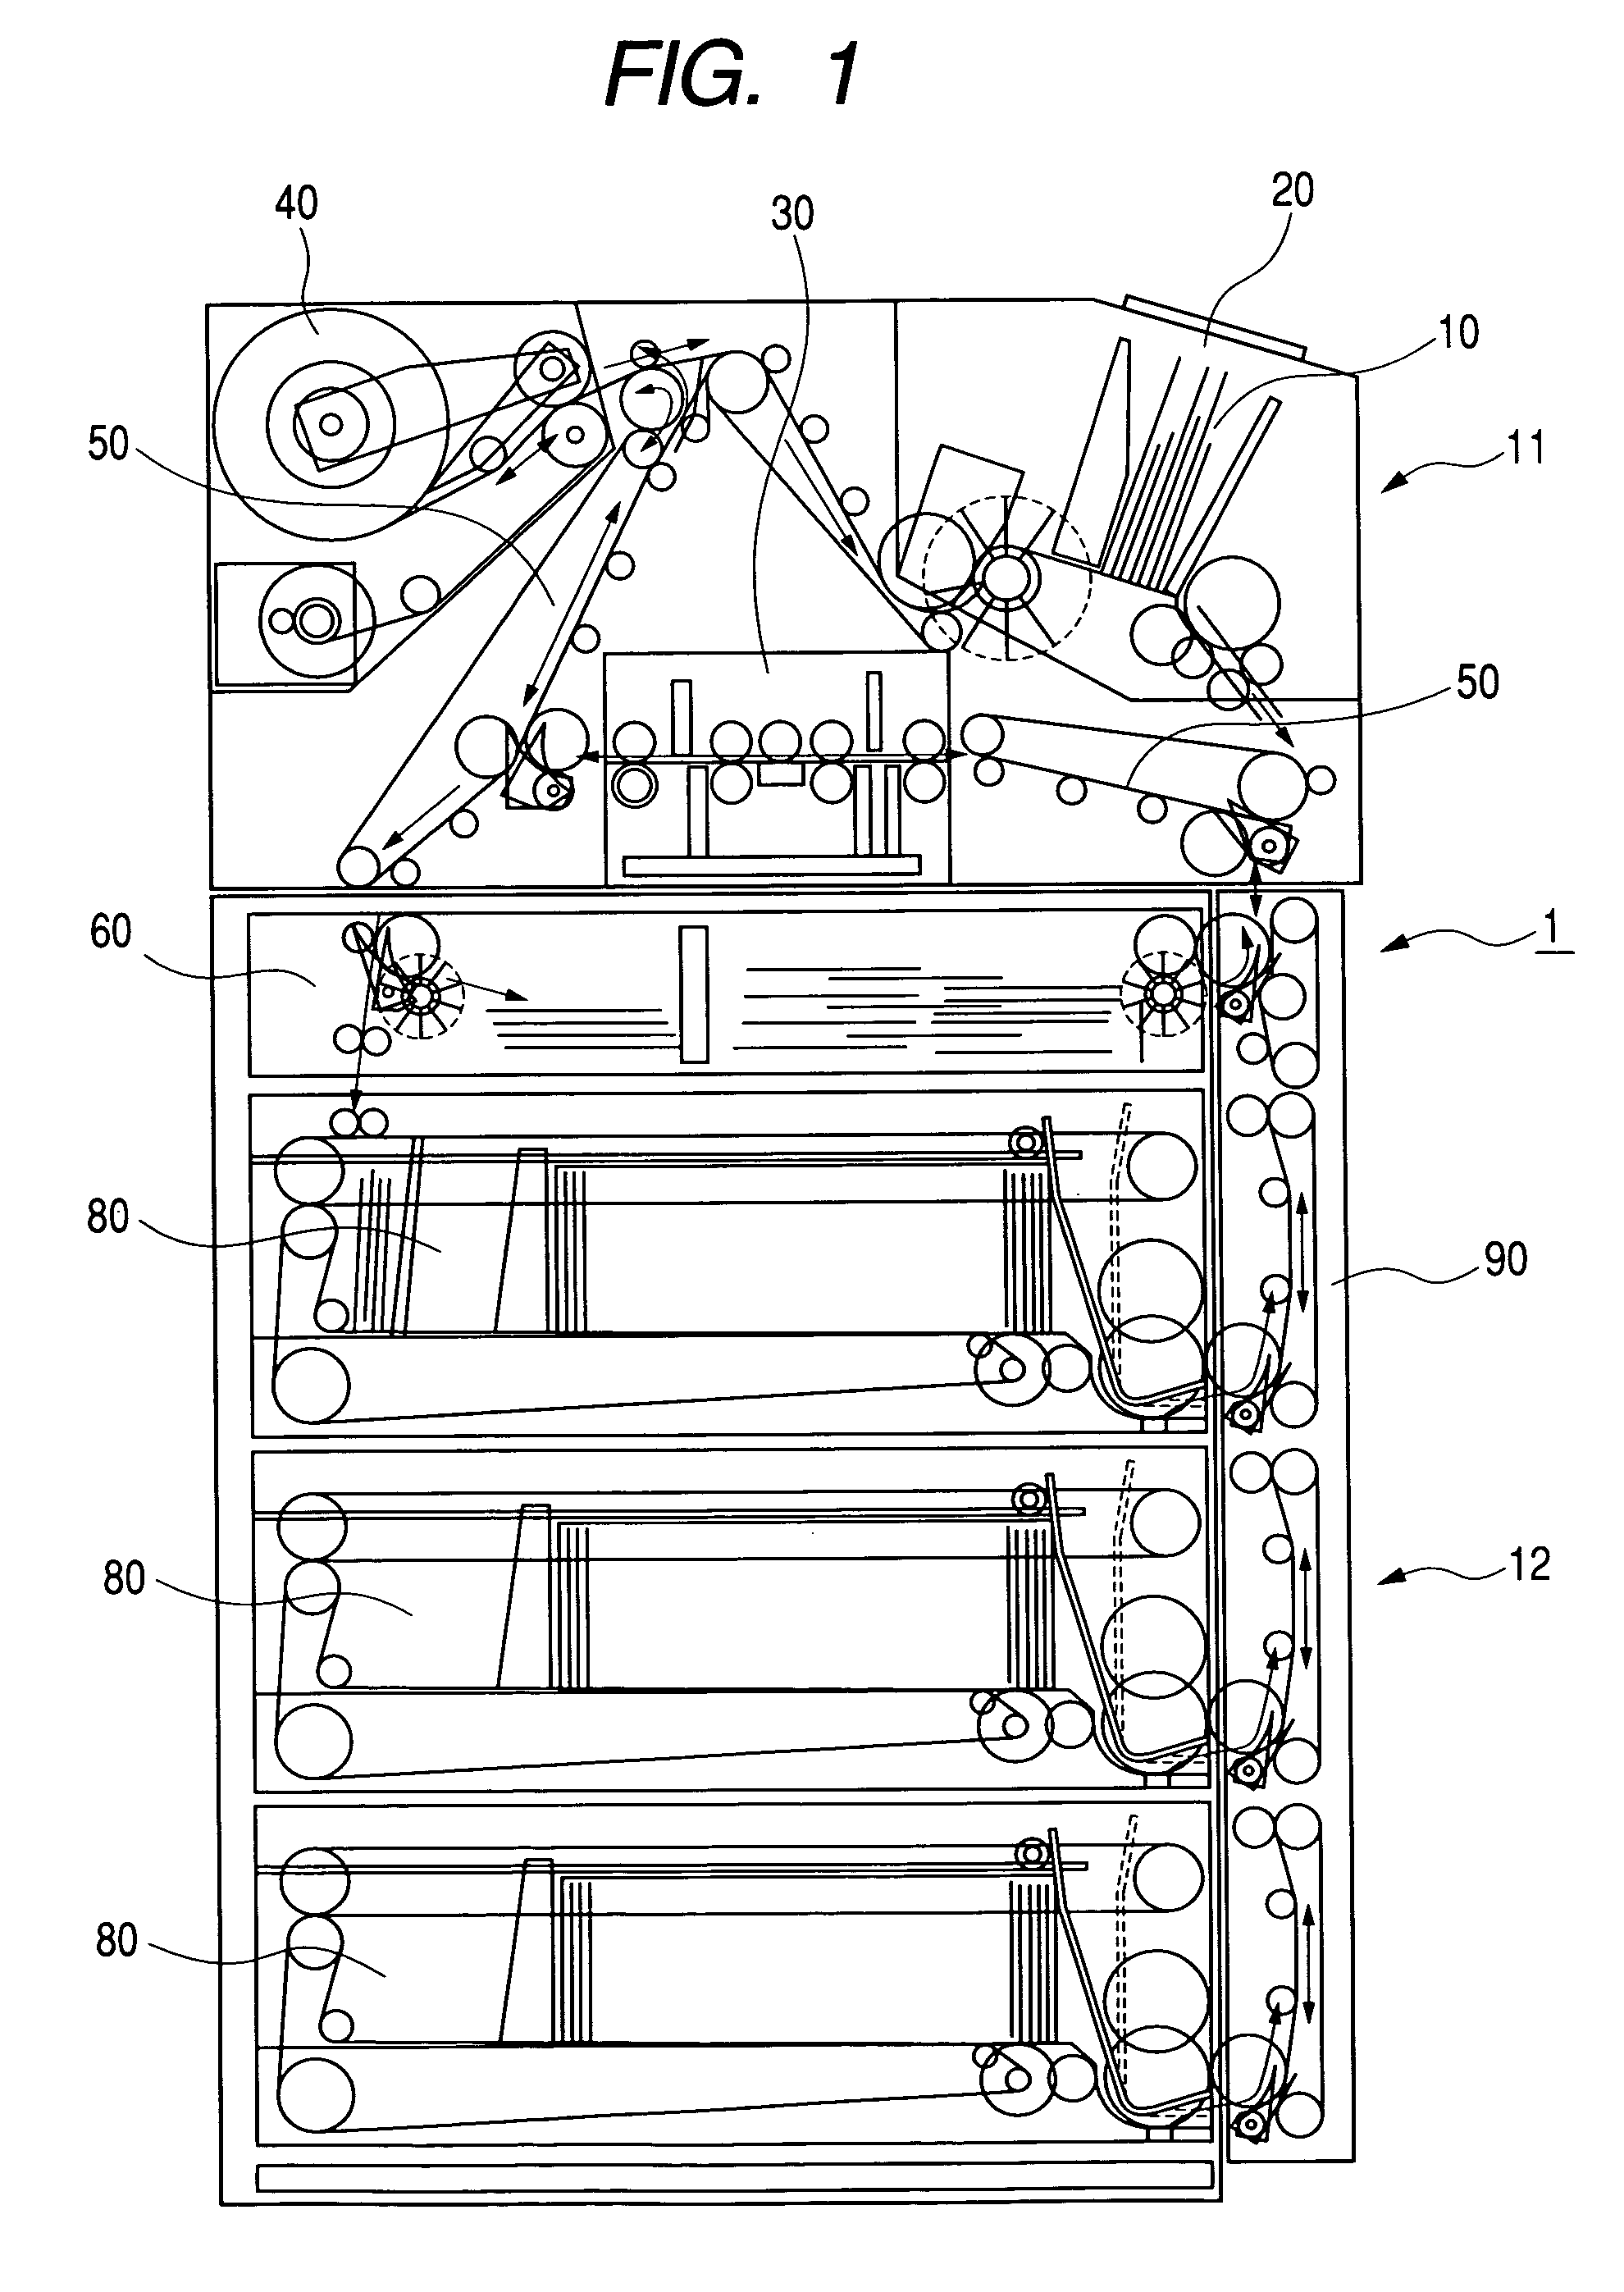 Paper sheet storing and releasing apparatus